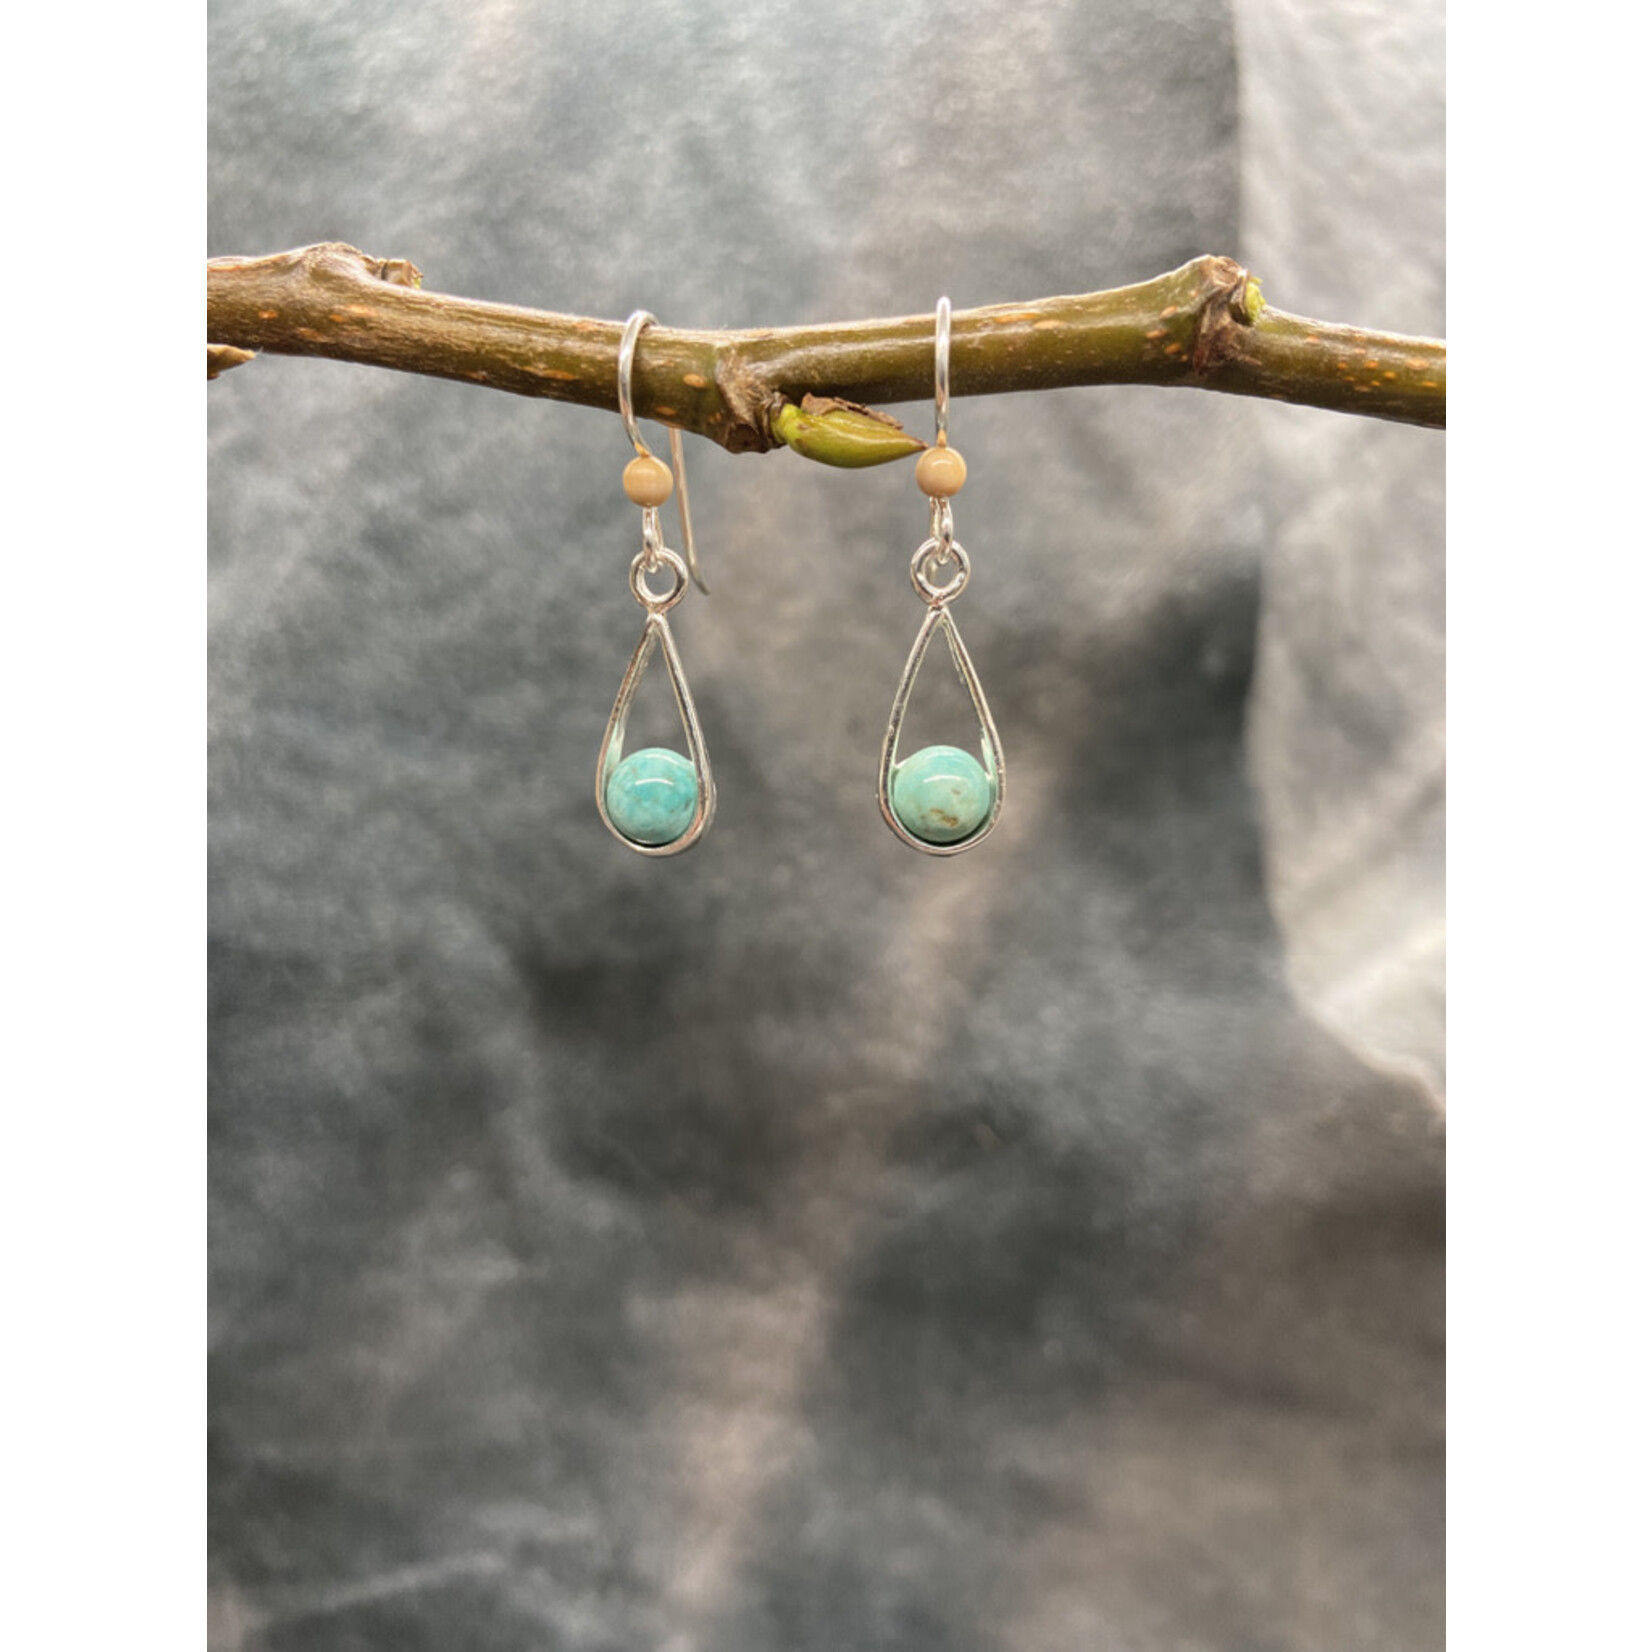 6mm Cupped Turquoise Bead Earrings